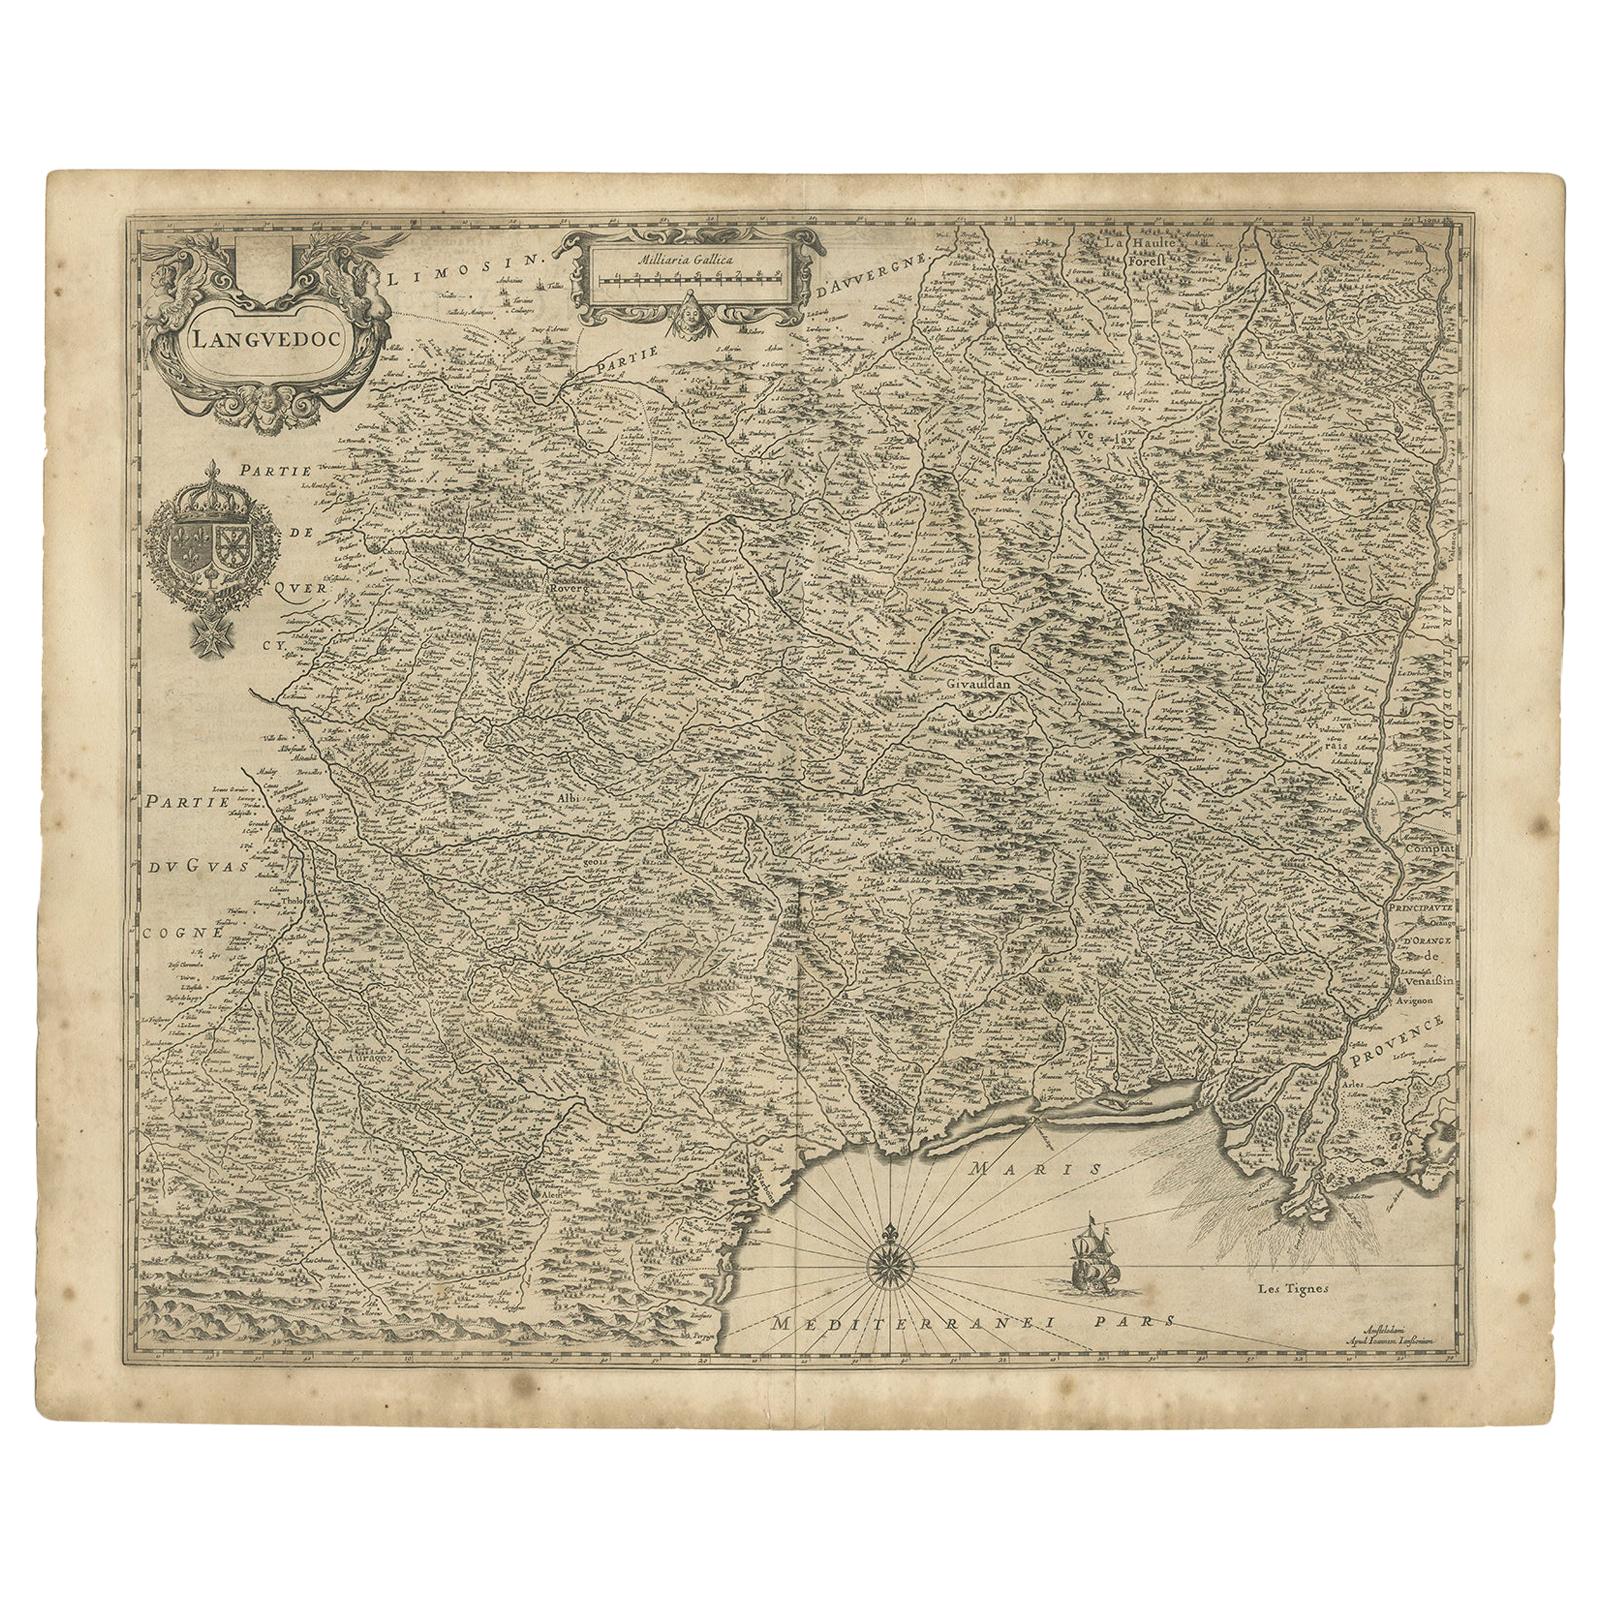 Antique Map of the Region of Languedoc by Janssonius, '1657'